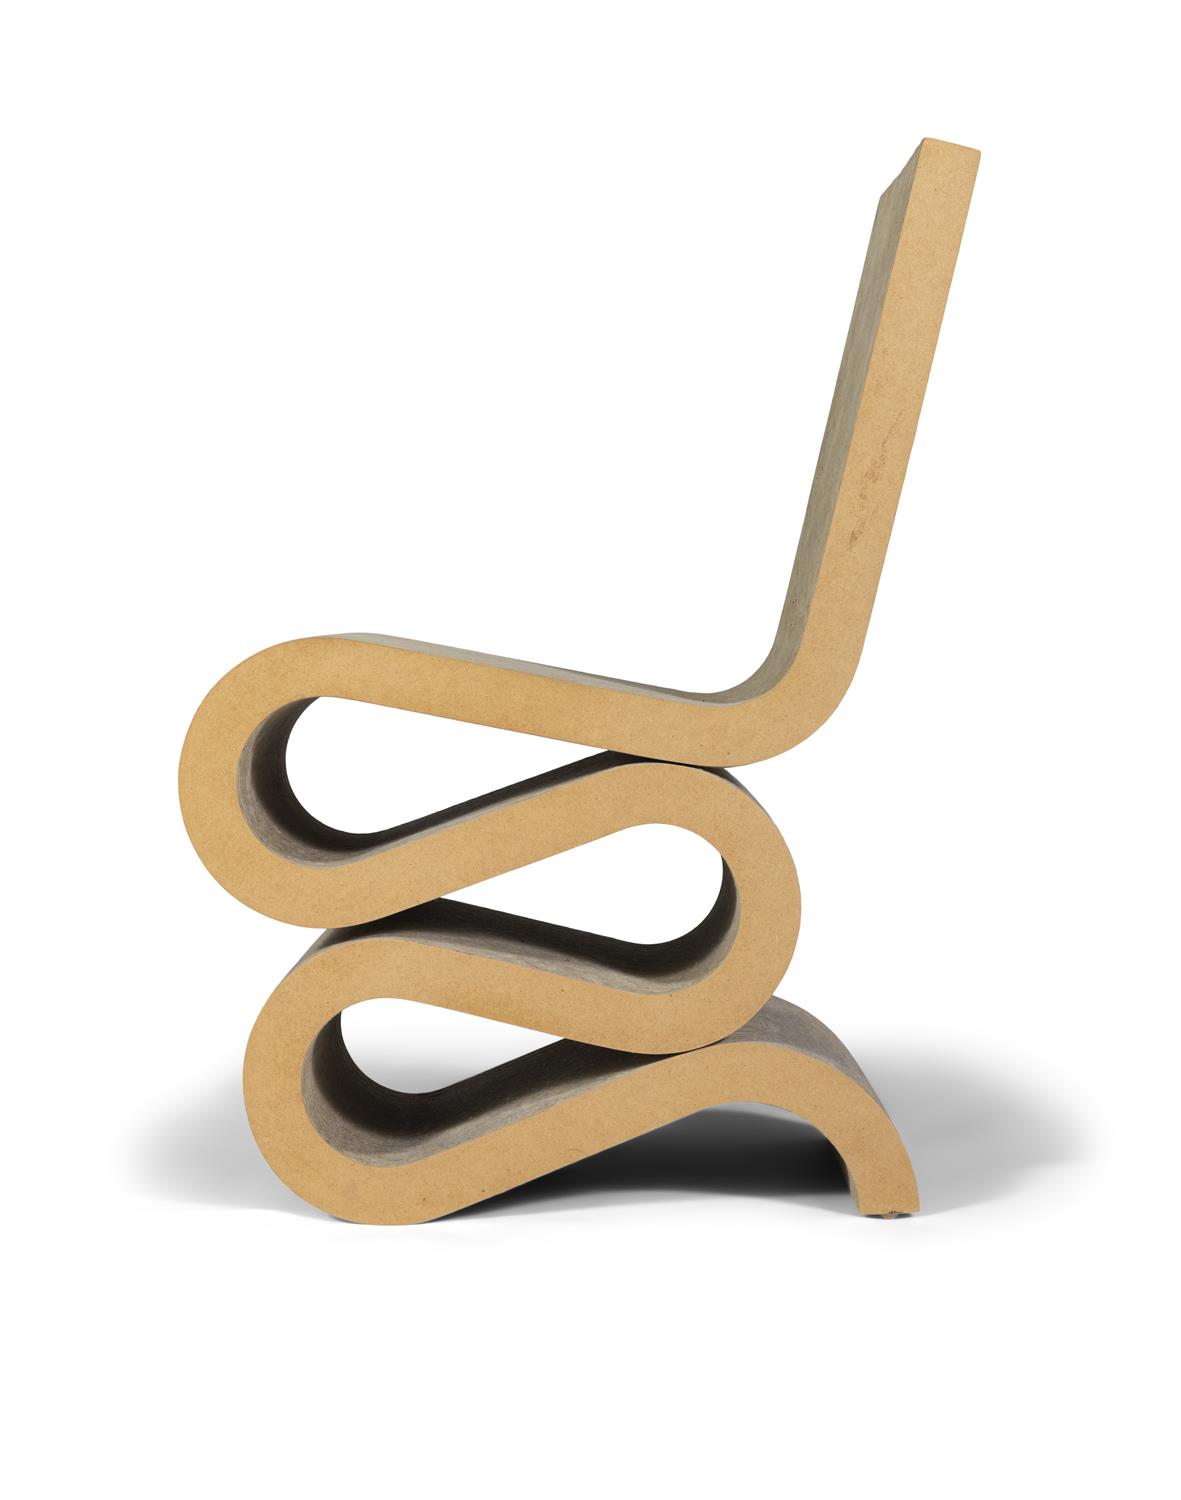 FRANK GEHRY (B. 1929) 'Wiggle' chair by Frank Gehry for Vitra with maker's label. 35. - Image 3 of 4